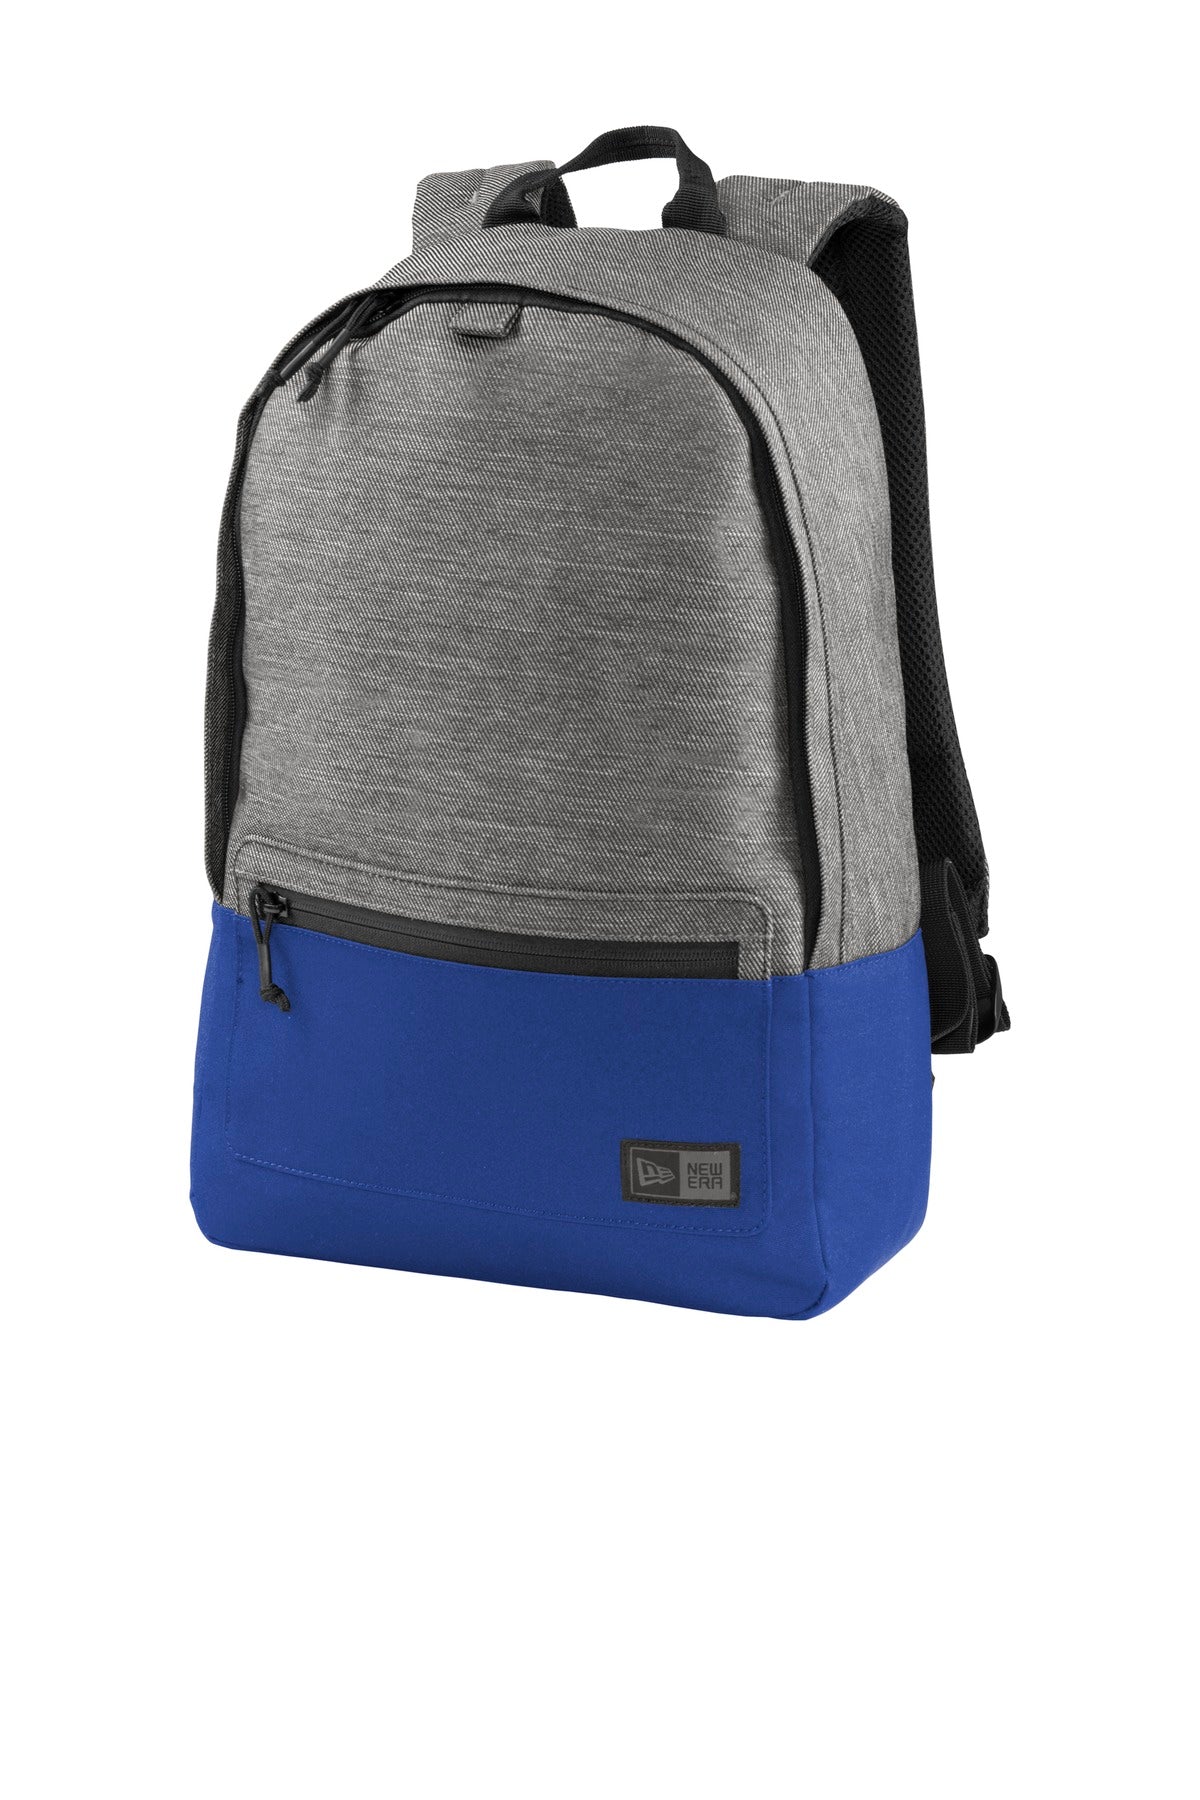 Photo of New Era Bags NEB201  color  Grey Twill Heather/ Royal